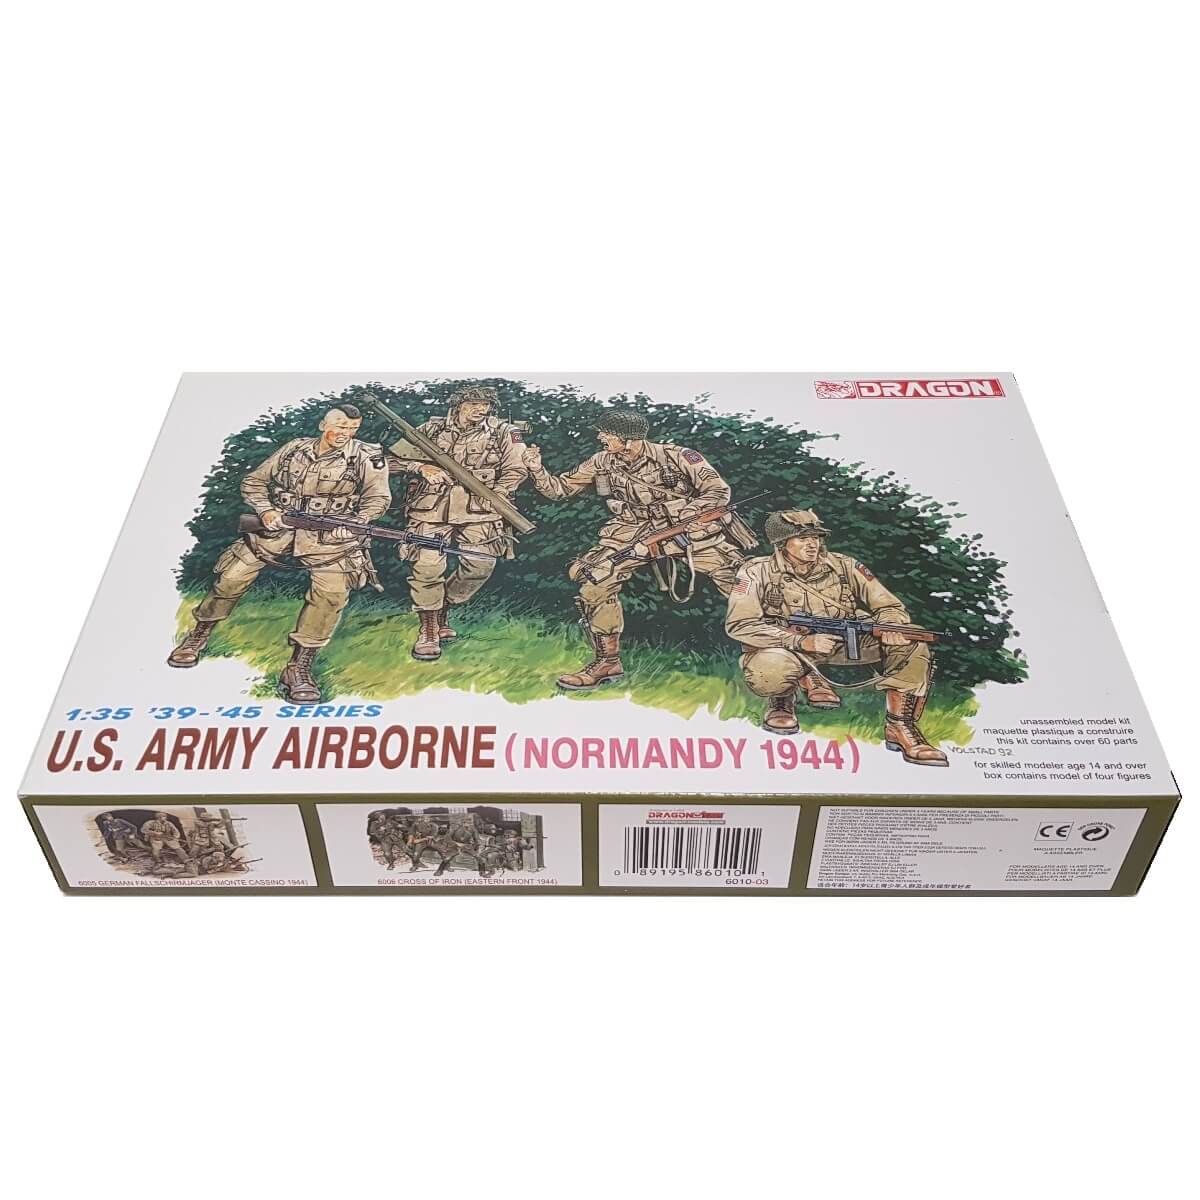 1:35 US Army Airborne - Normandy 1944 - DRAGON